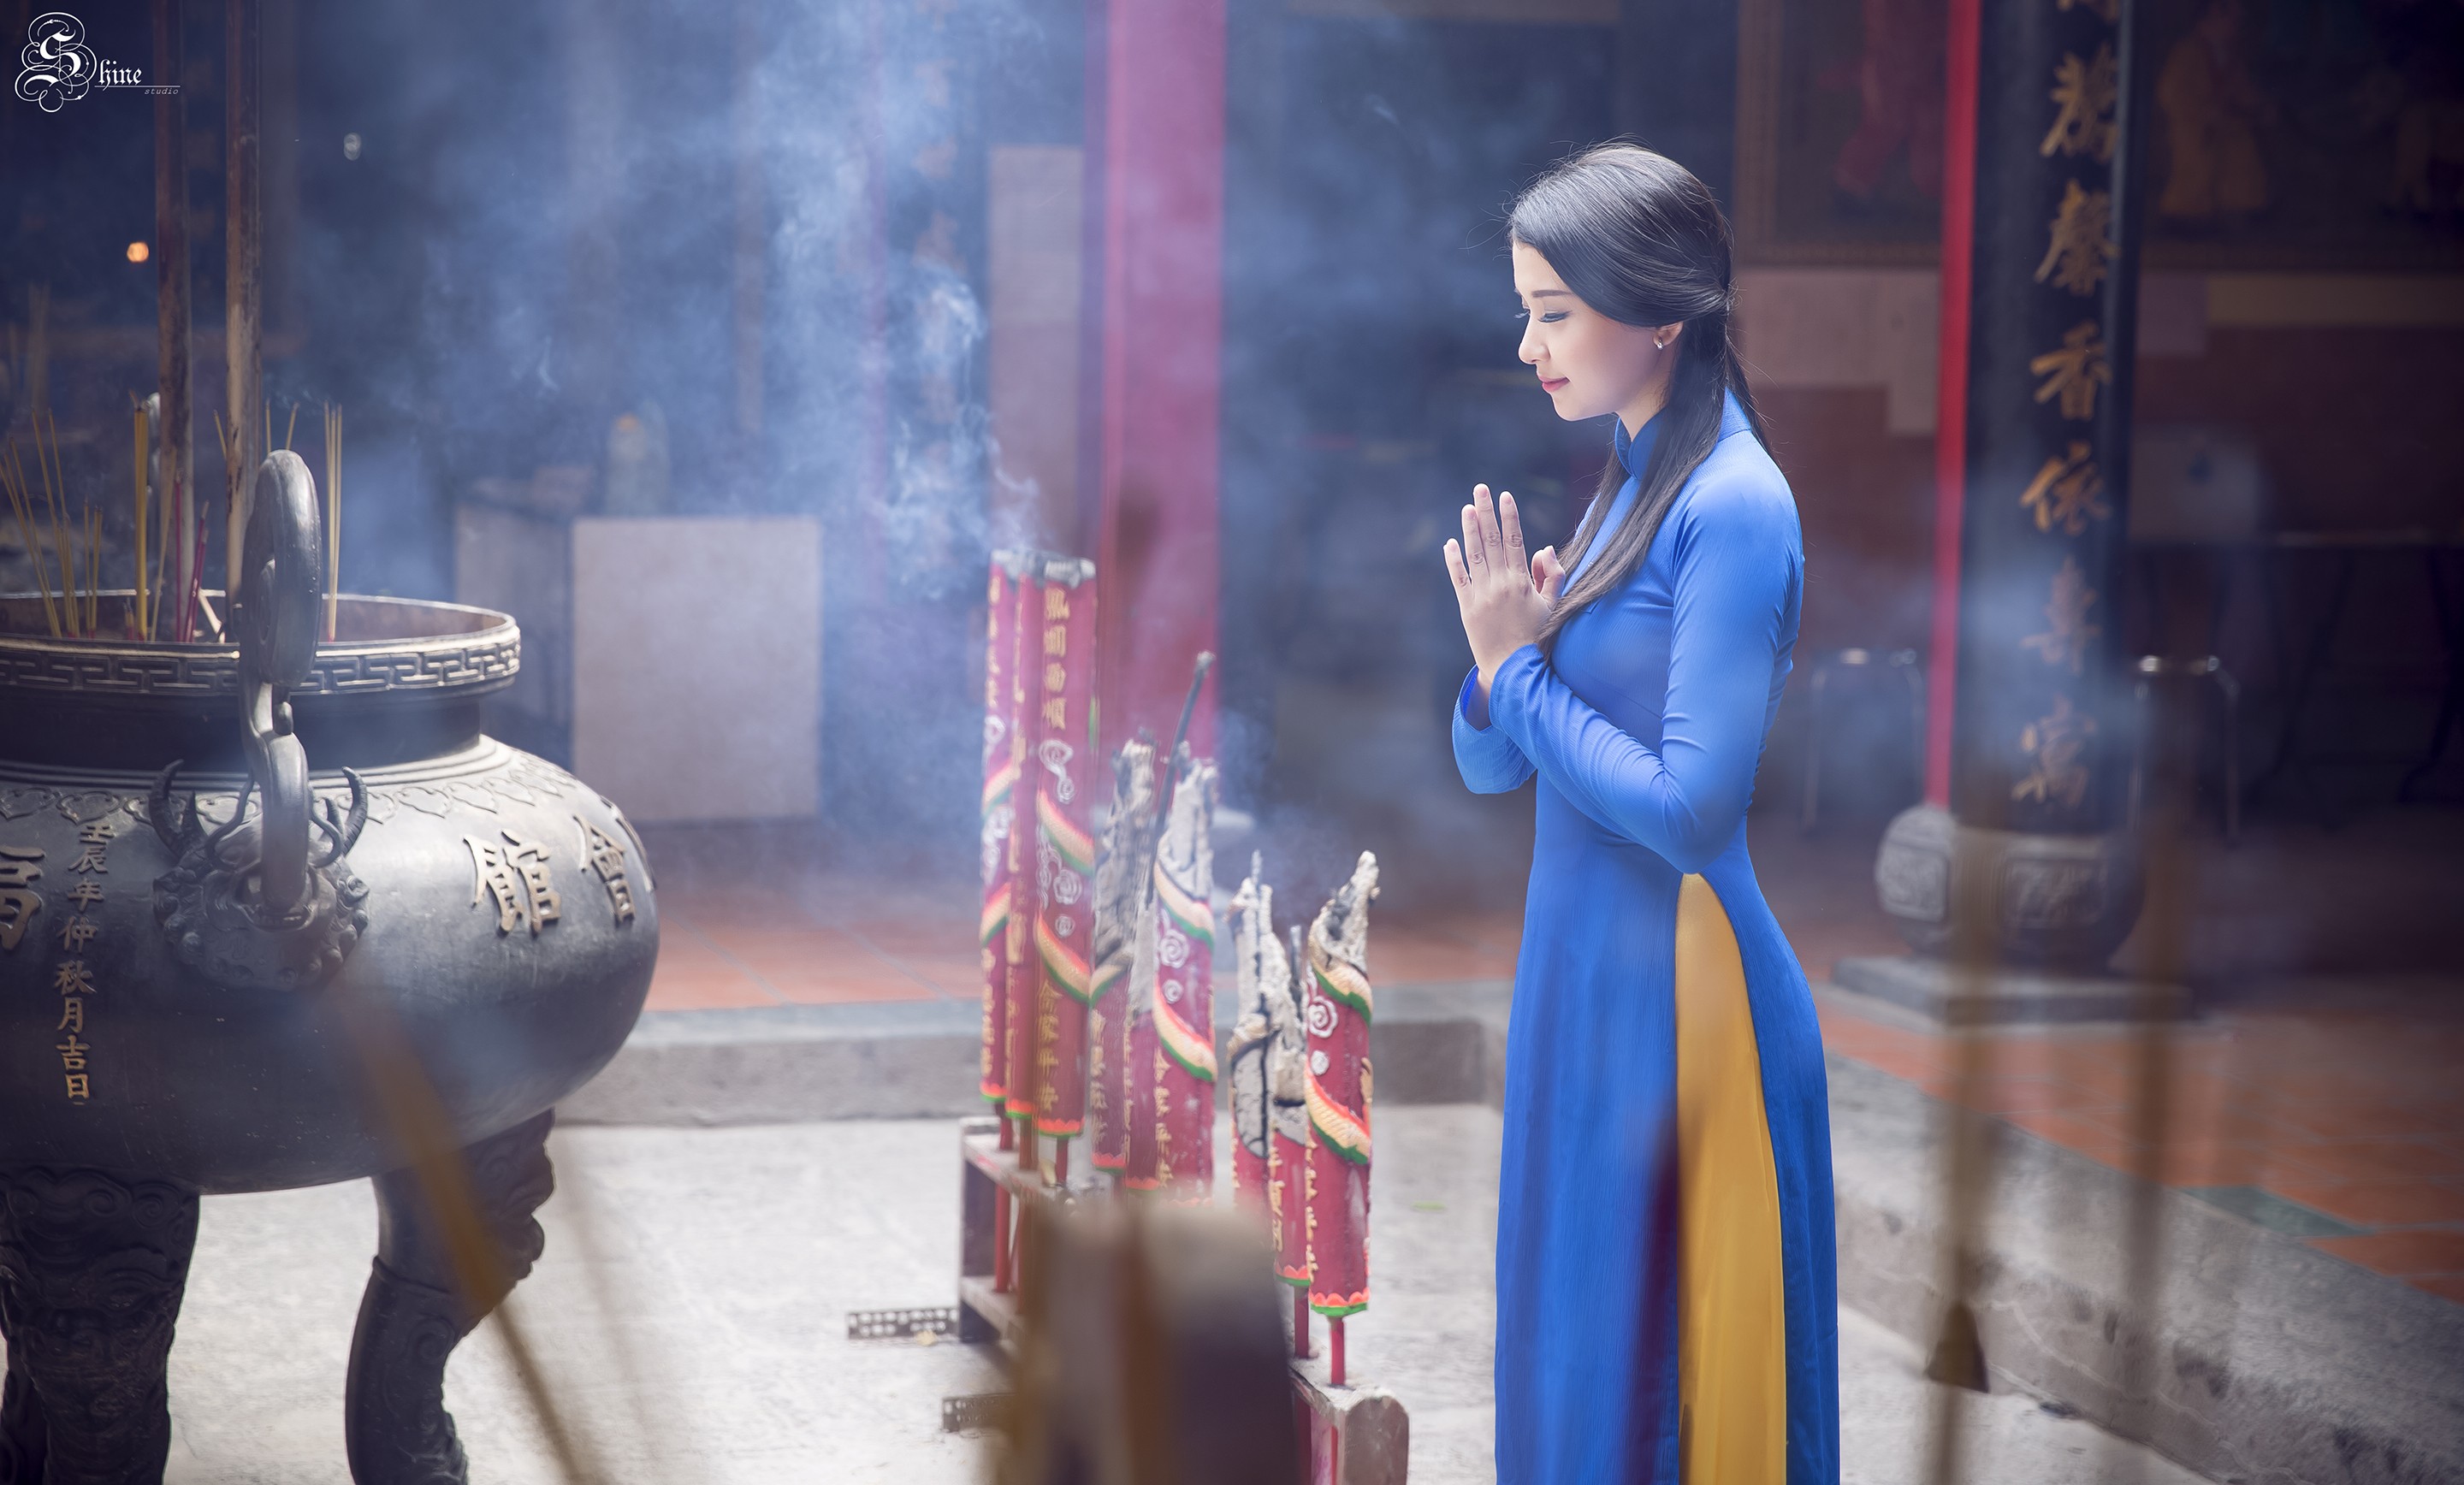 Ceremony Incense Traditional Clothing Praying Brunette Depth Of Field Shrine 2880x1736